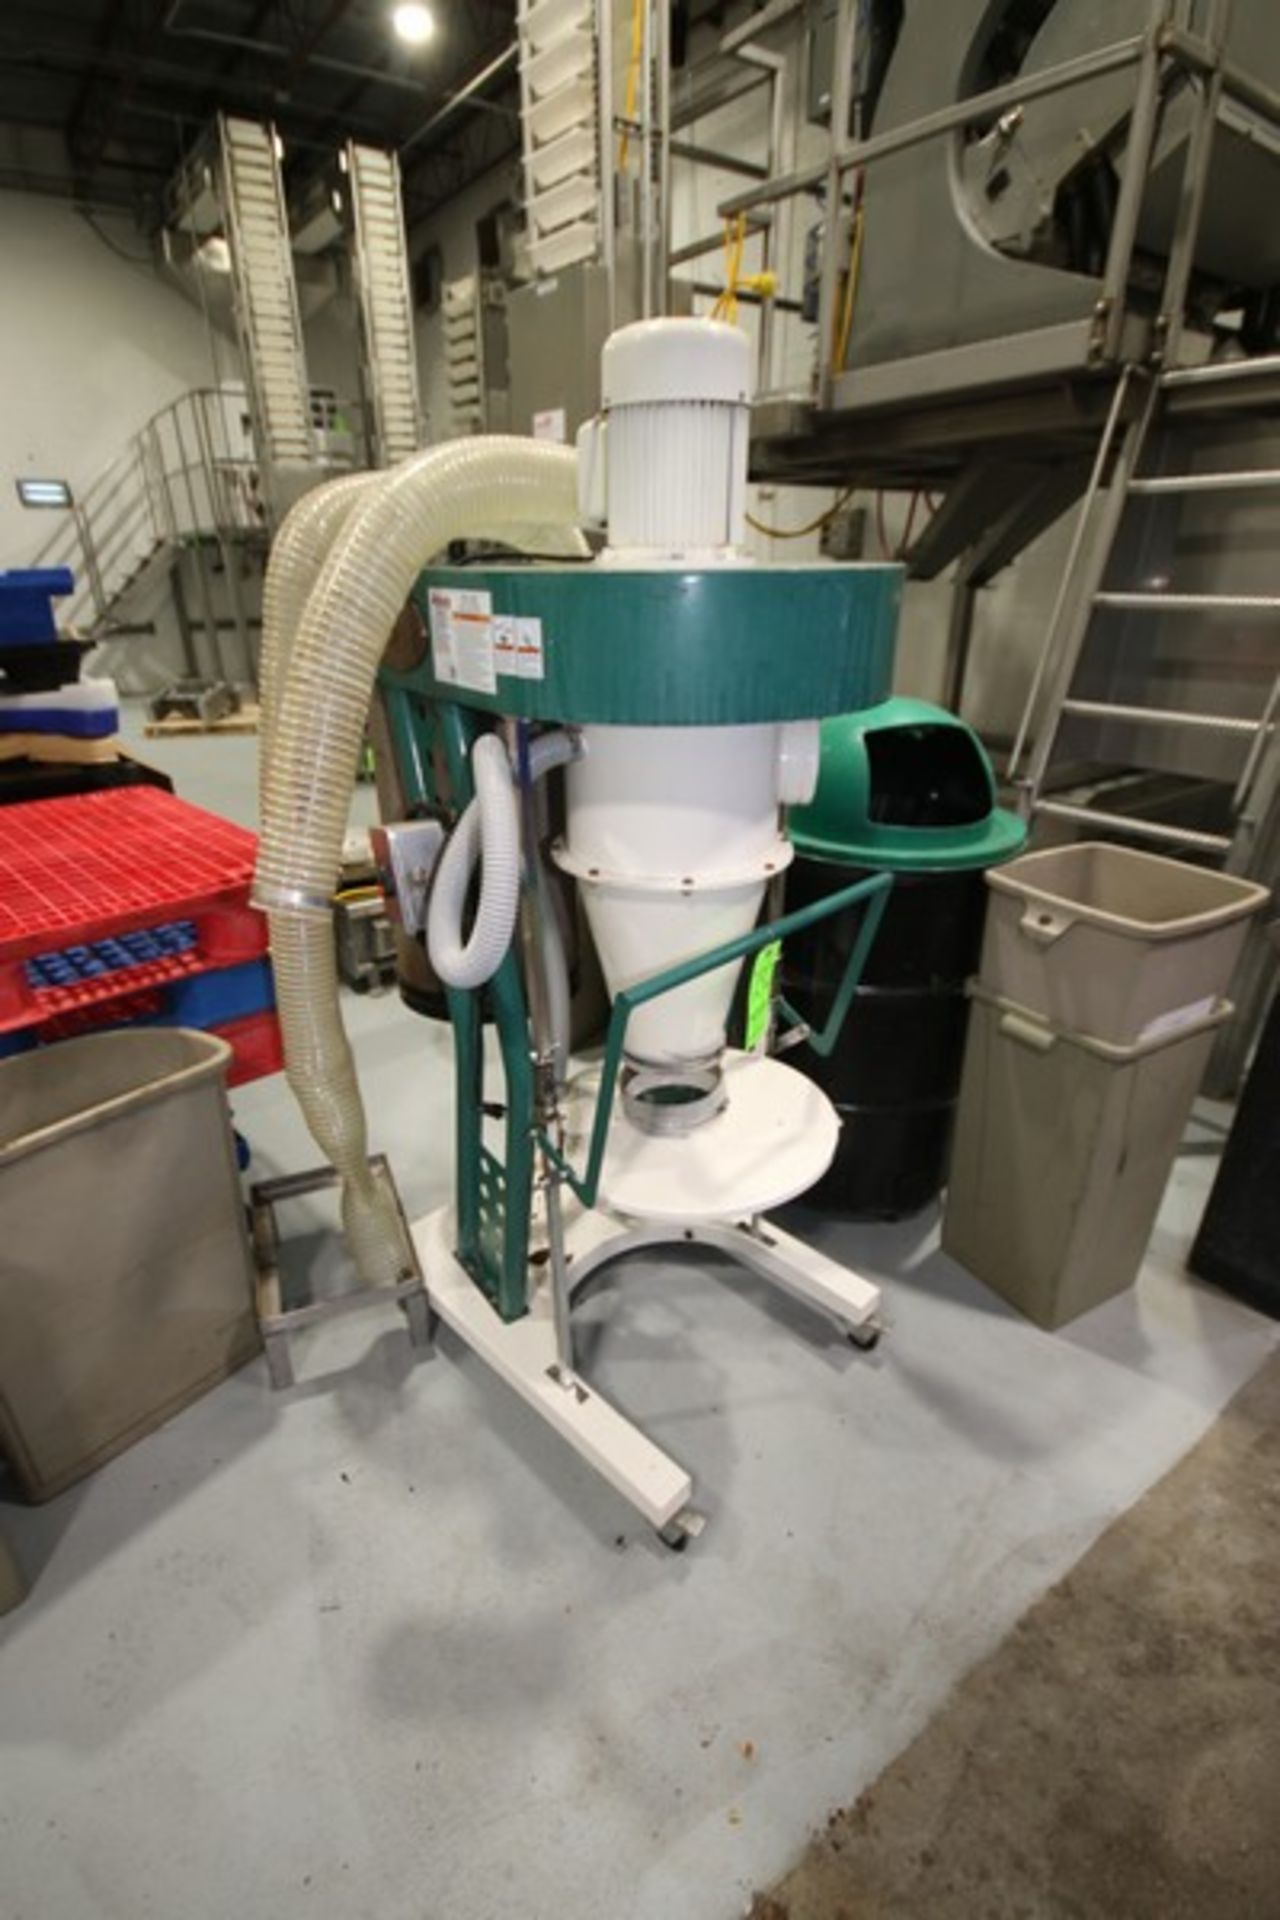 Grizzly Cyclone Dust Collector, M/N G0860, S/N F1191317, with 1.5 hp Motor, Mounted on Portable